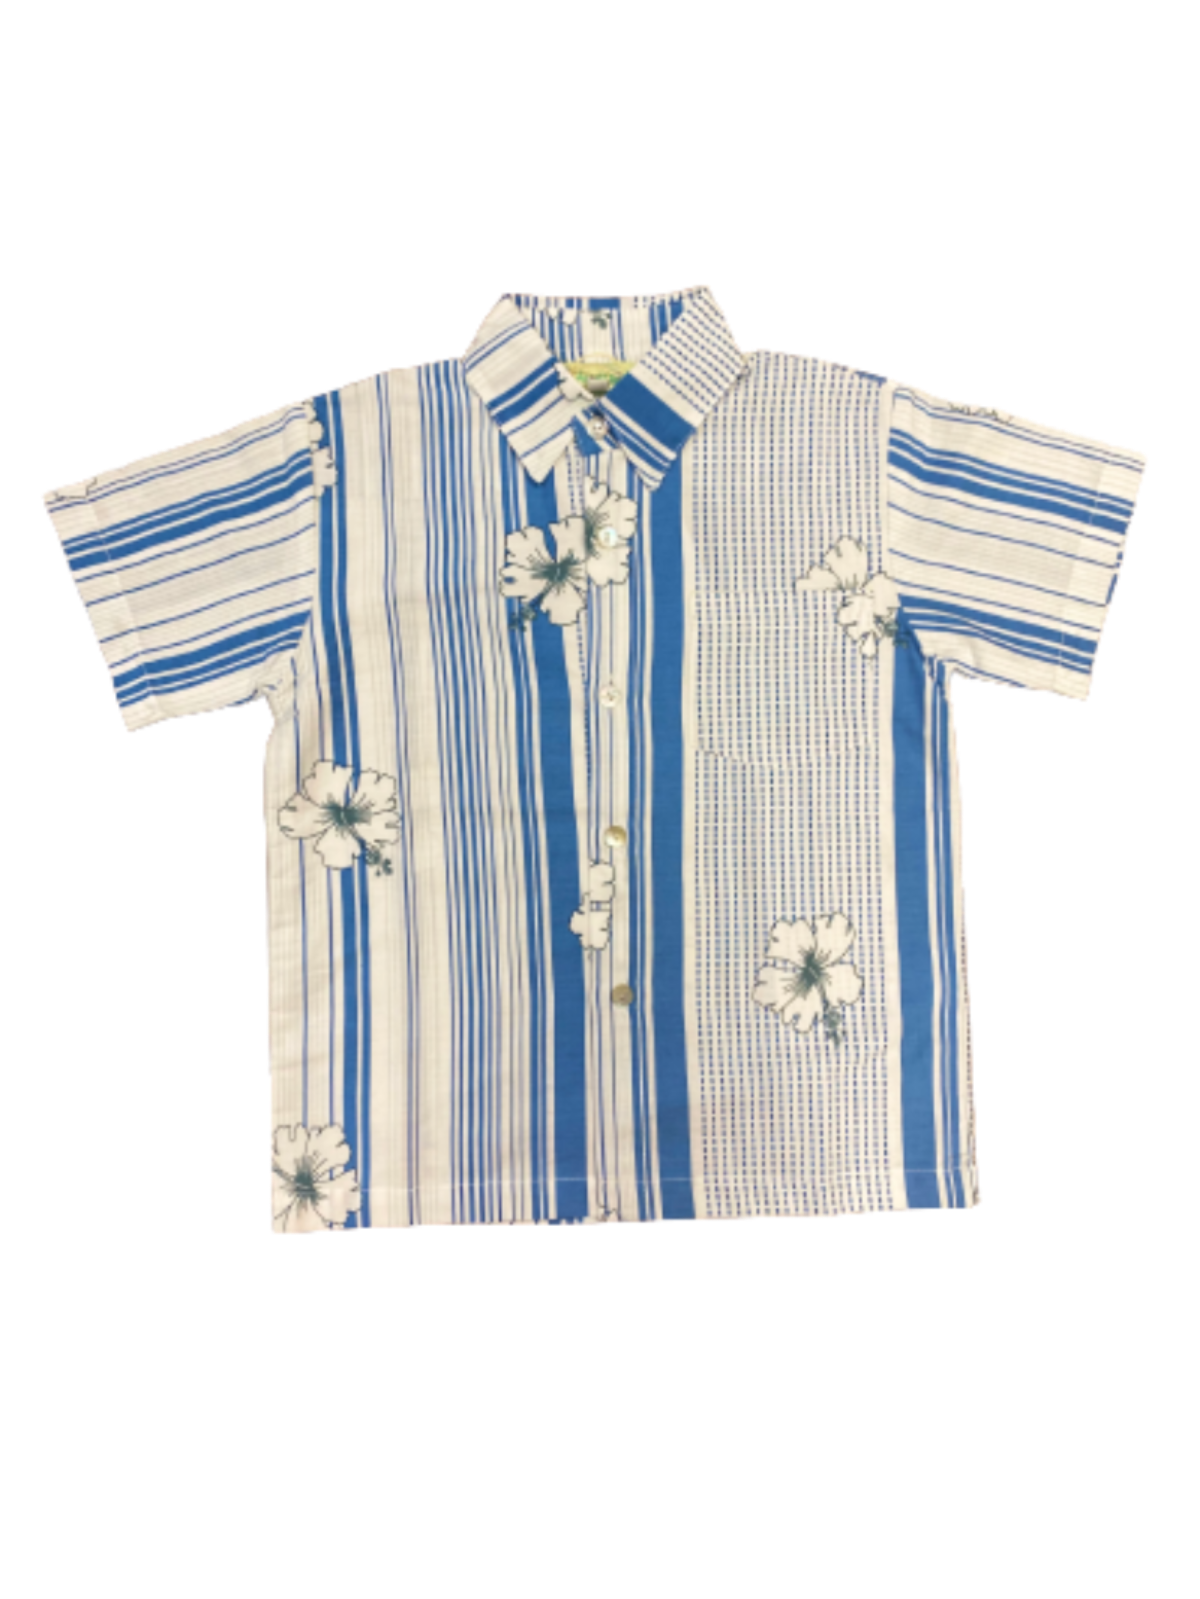 Kids Collection - Angels by the Sea Hawaii